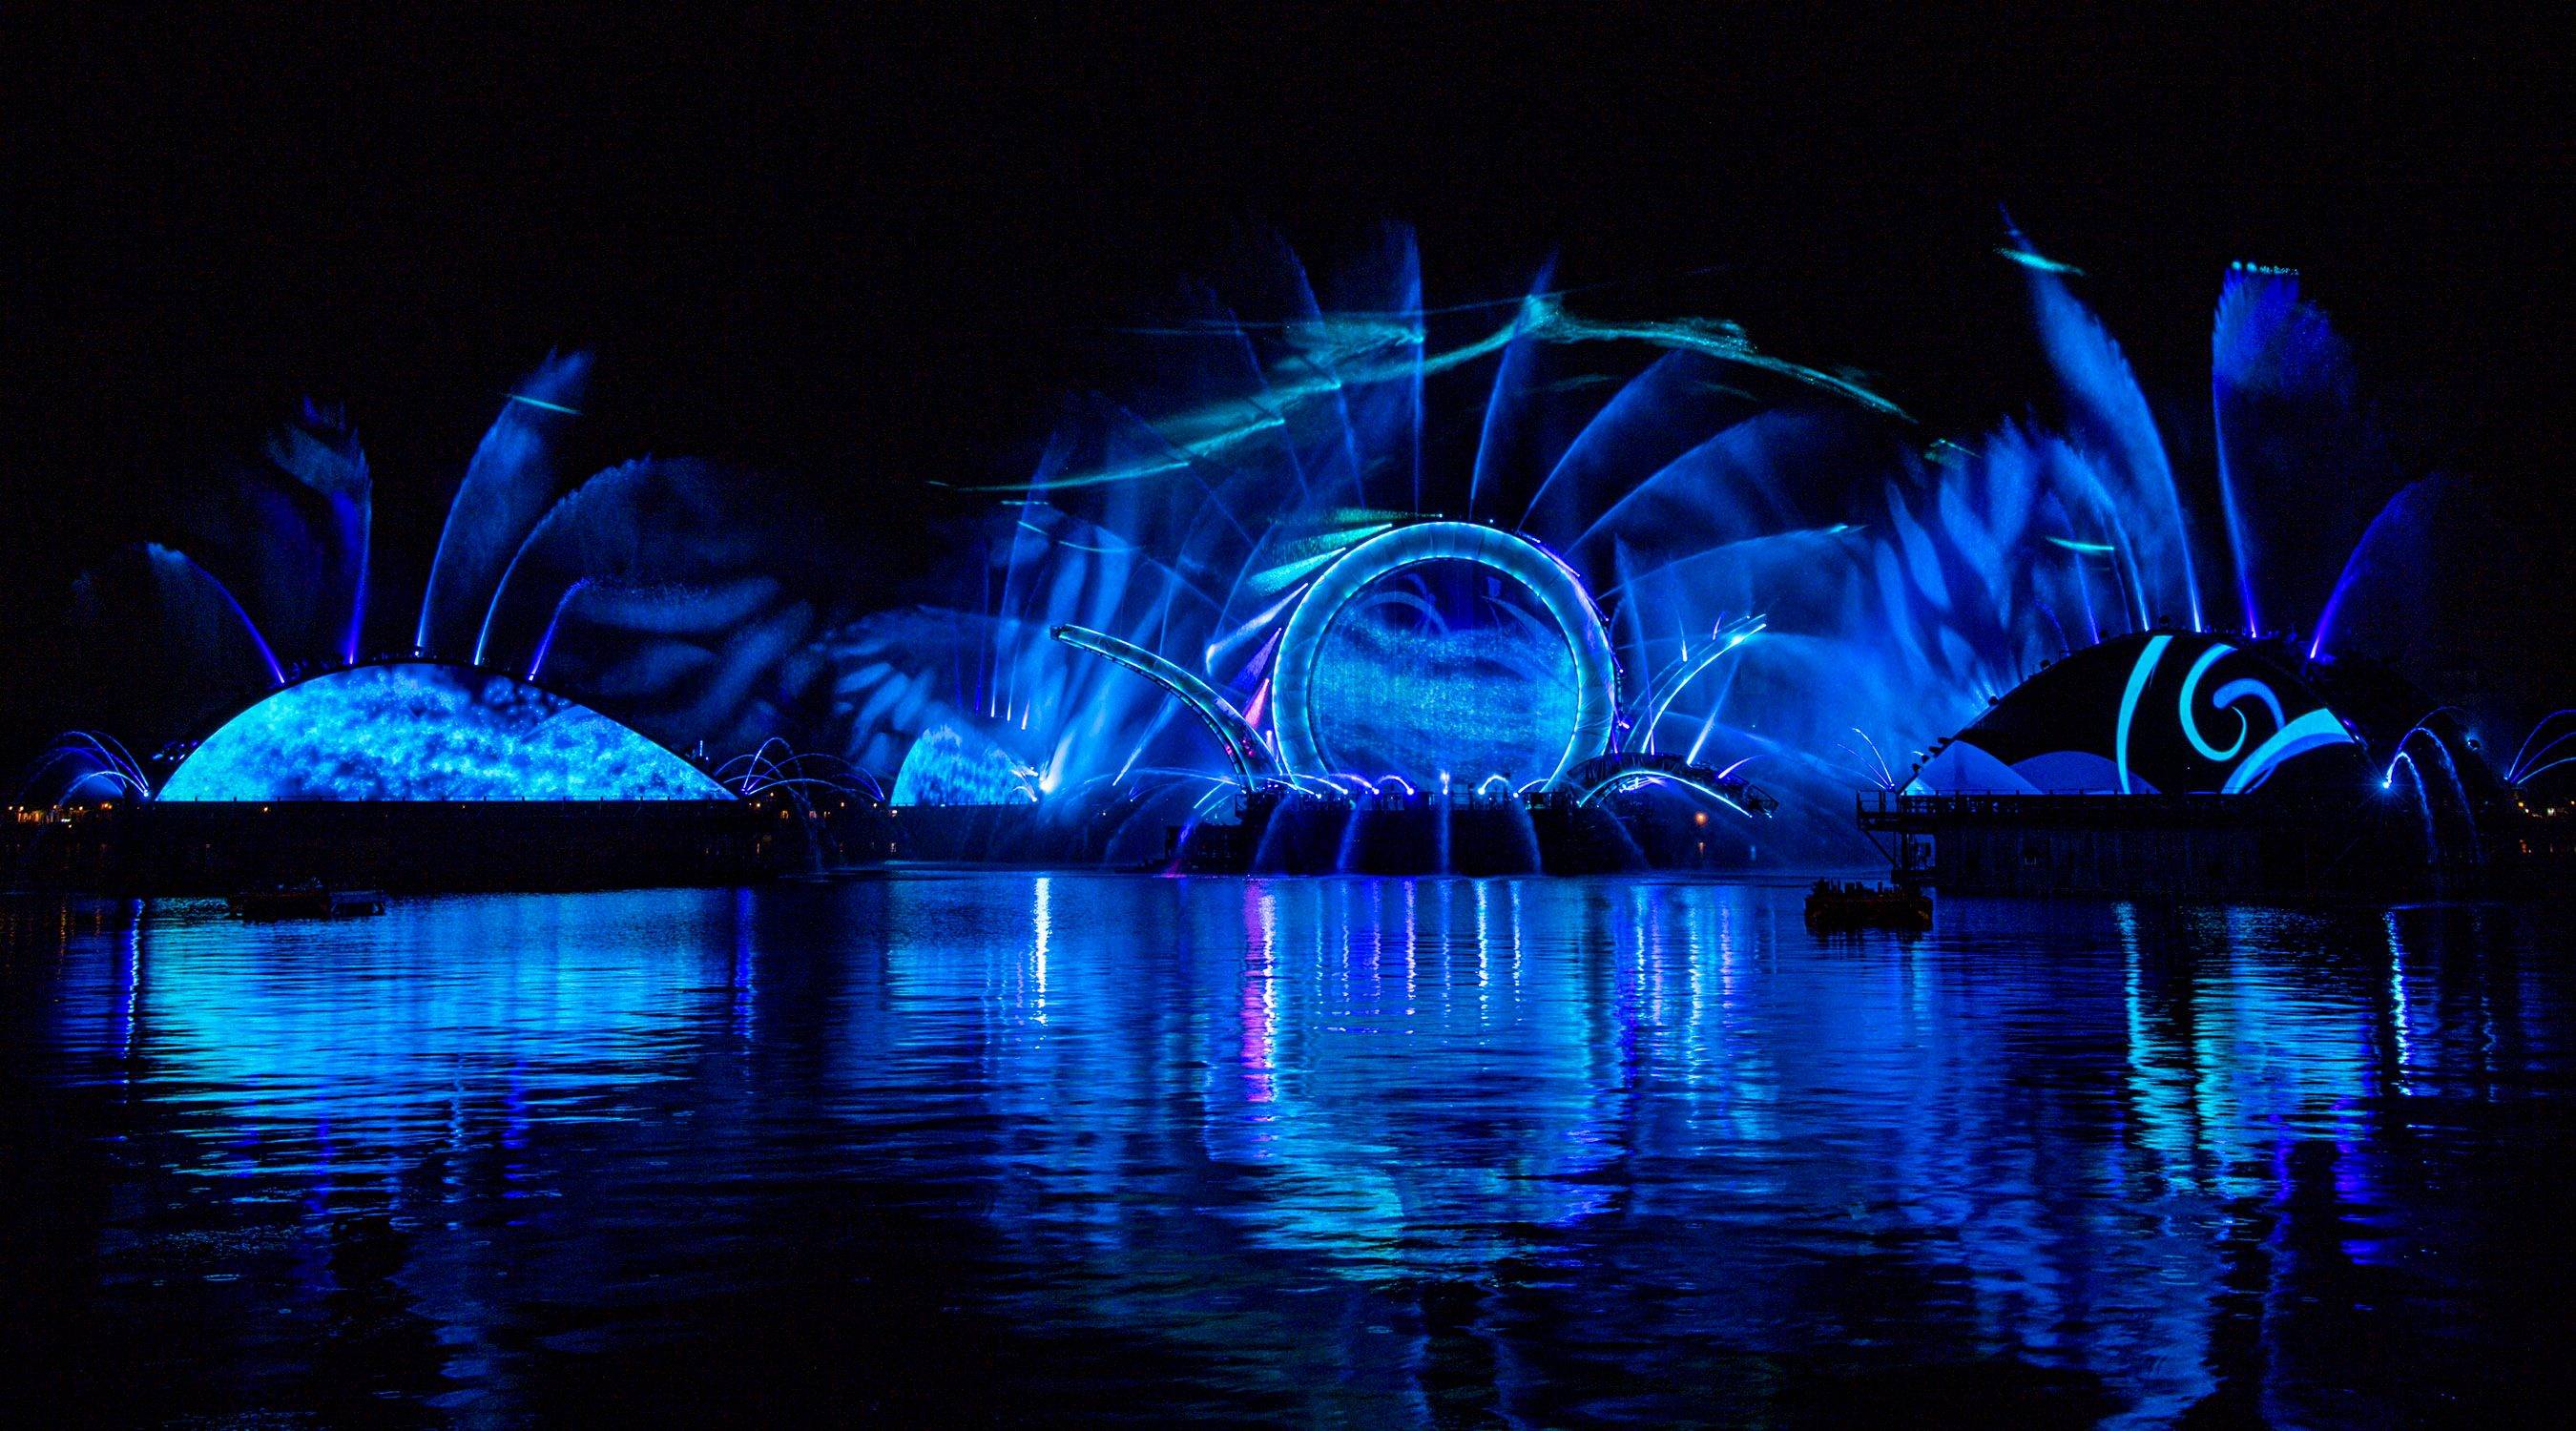 EPCOT's Harmonious added to the official calendar for 2 nights in September